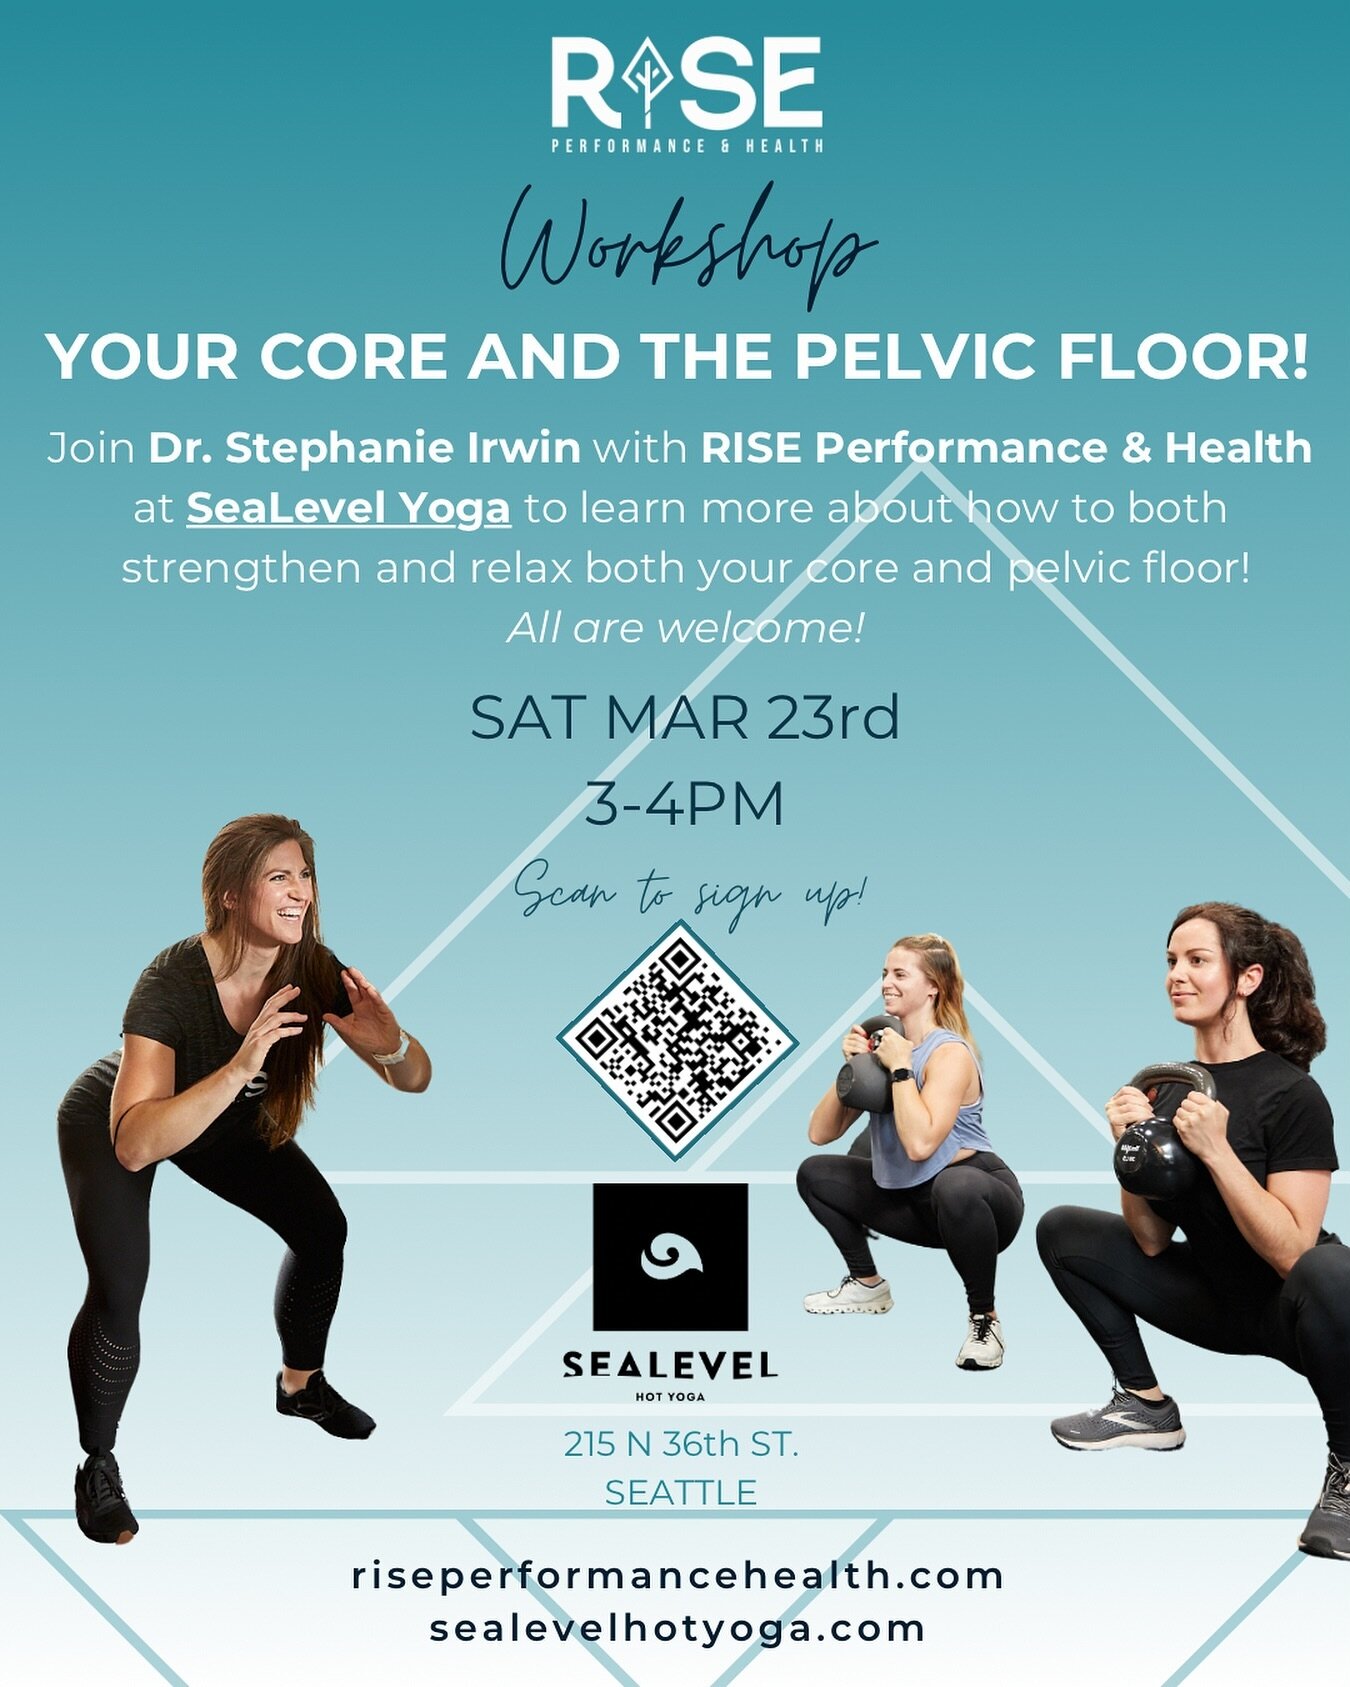 We are so excited to be partnering with @sealevelhotyoga to help our community optimize their whole health and strength! 
Kicking off our 3 month series this week we get to train our core and pelvic floor on a deeper level! 

Join Dr. Stephanie Irwin